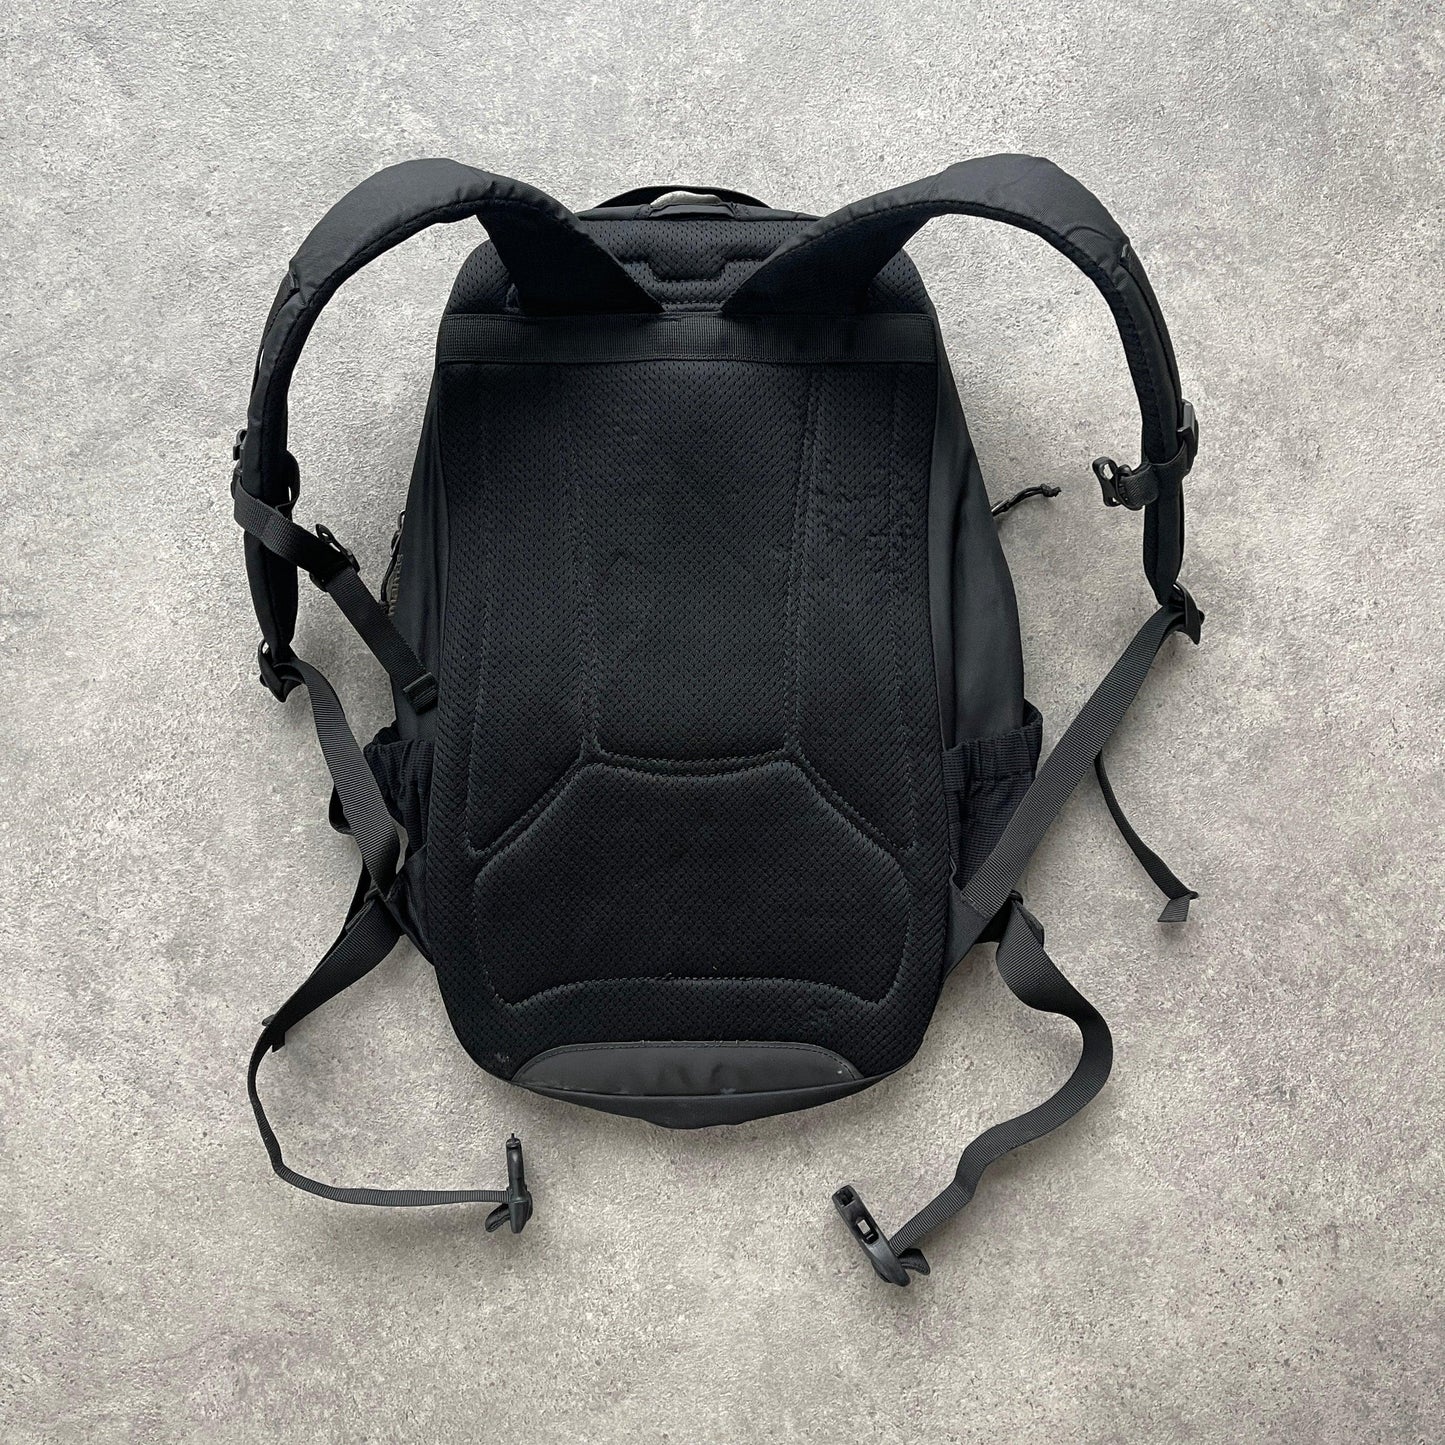 Arc’teryx Mantis 26 backpack (20”x12”x10”) - Known Source